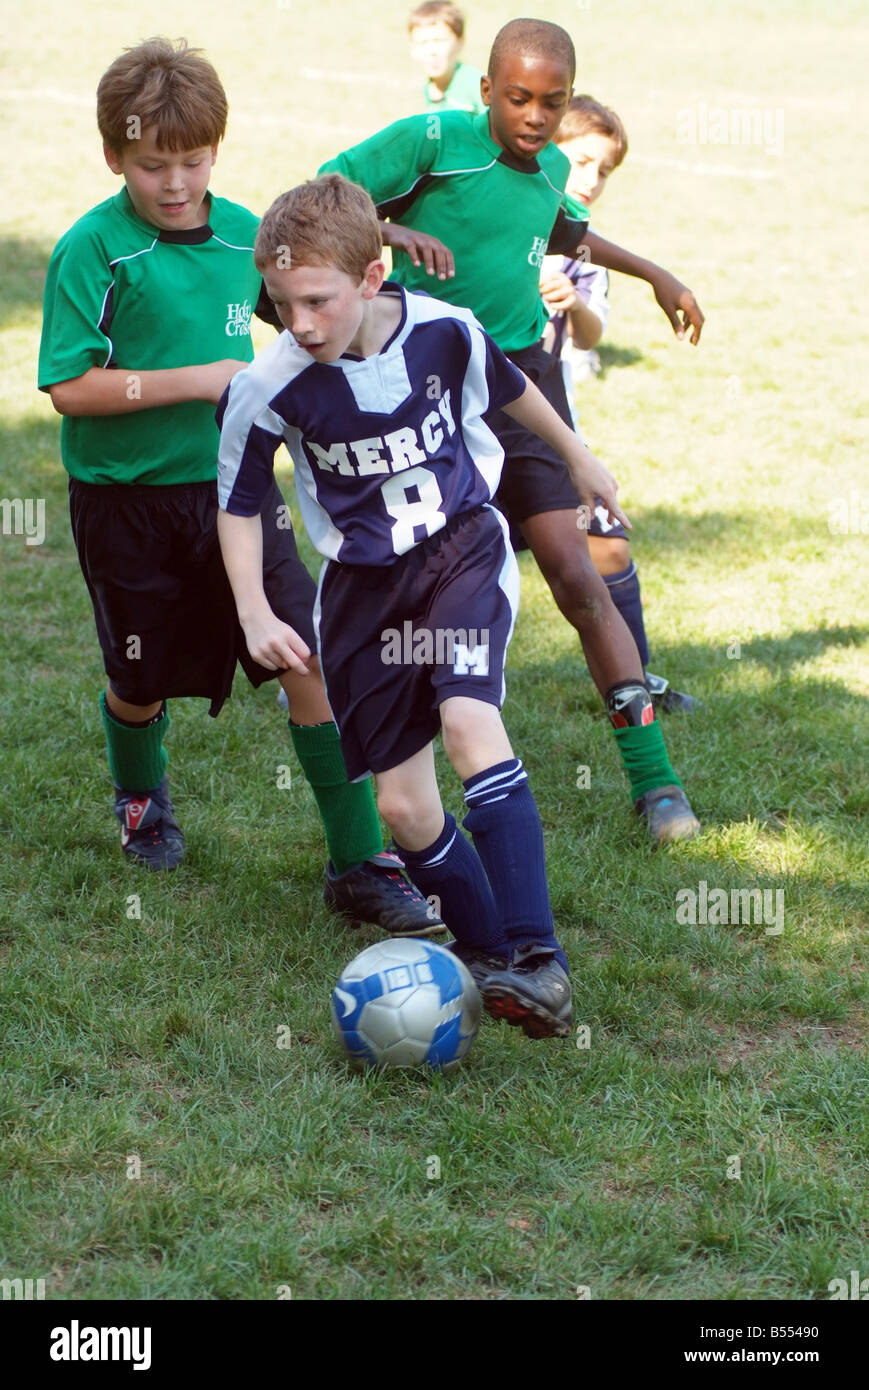 9 10 11 year old boys play soccer football on a grassy field in Maryland USA Stock Photo